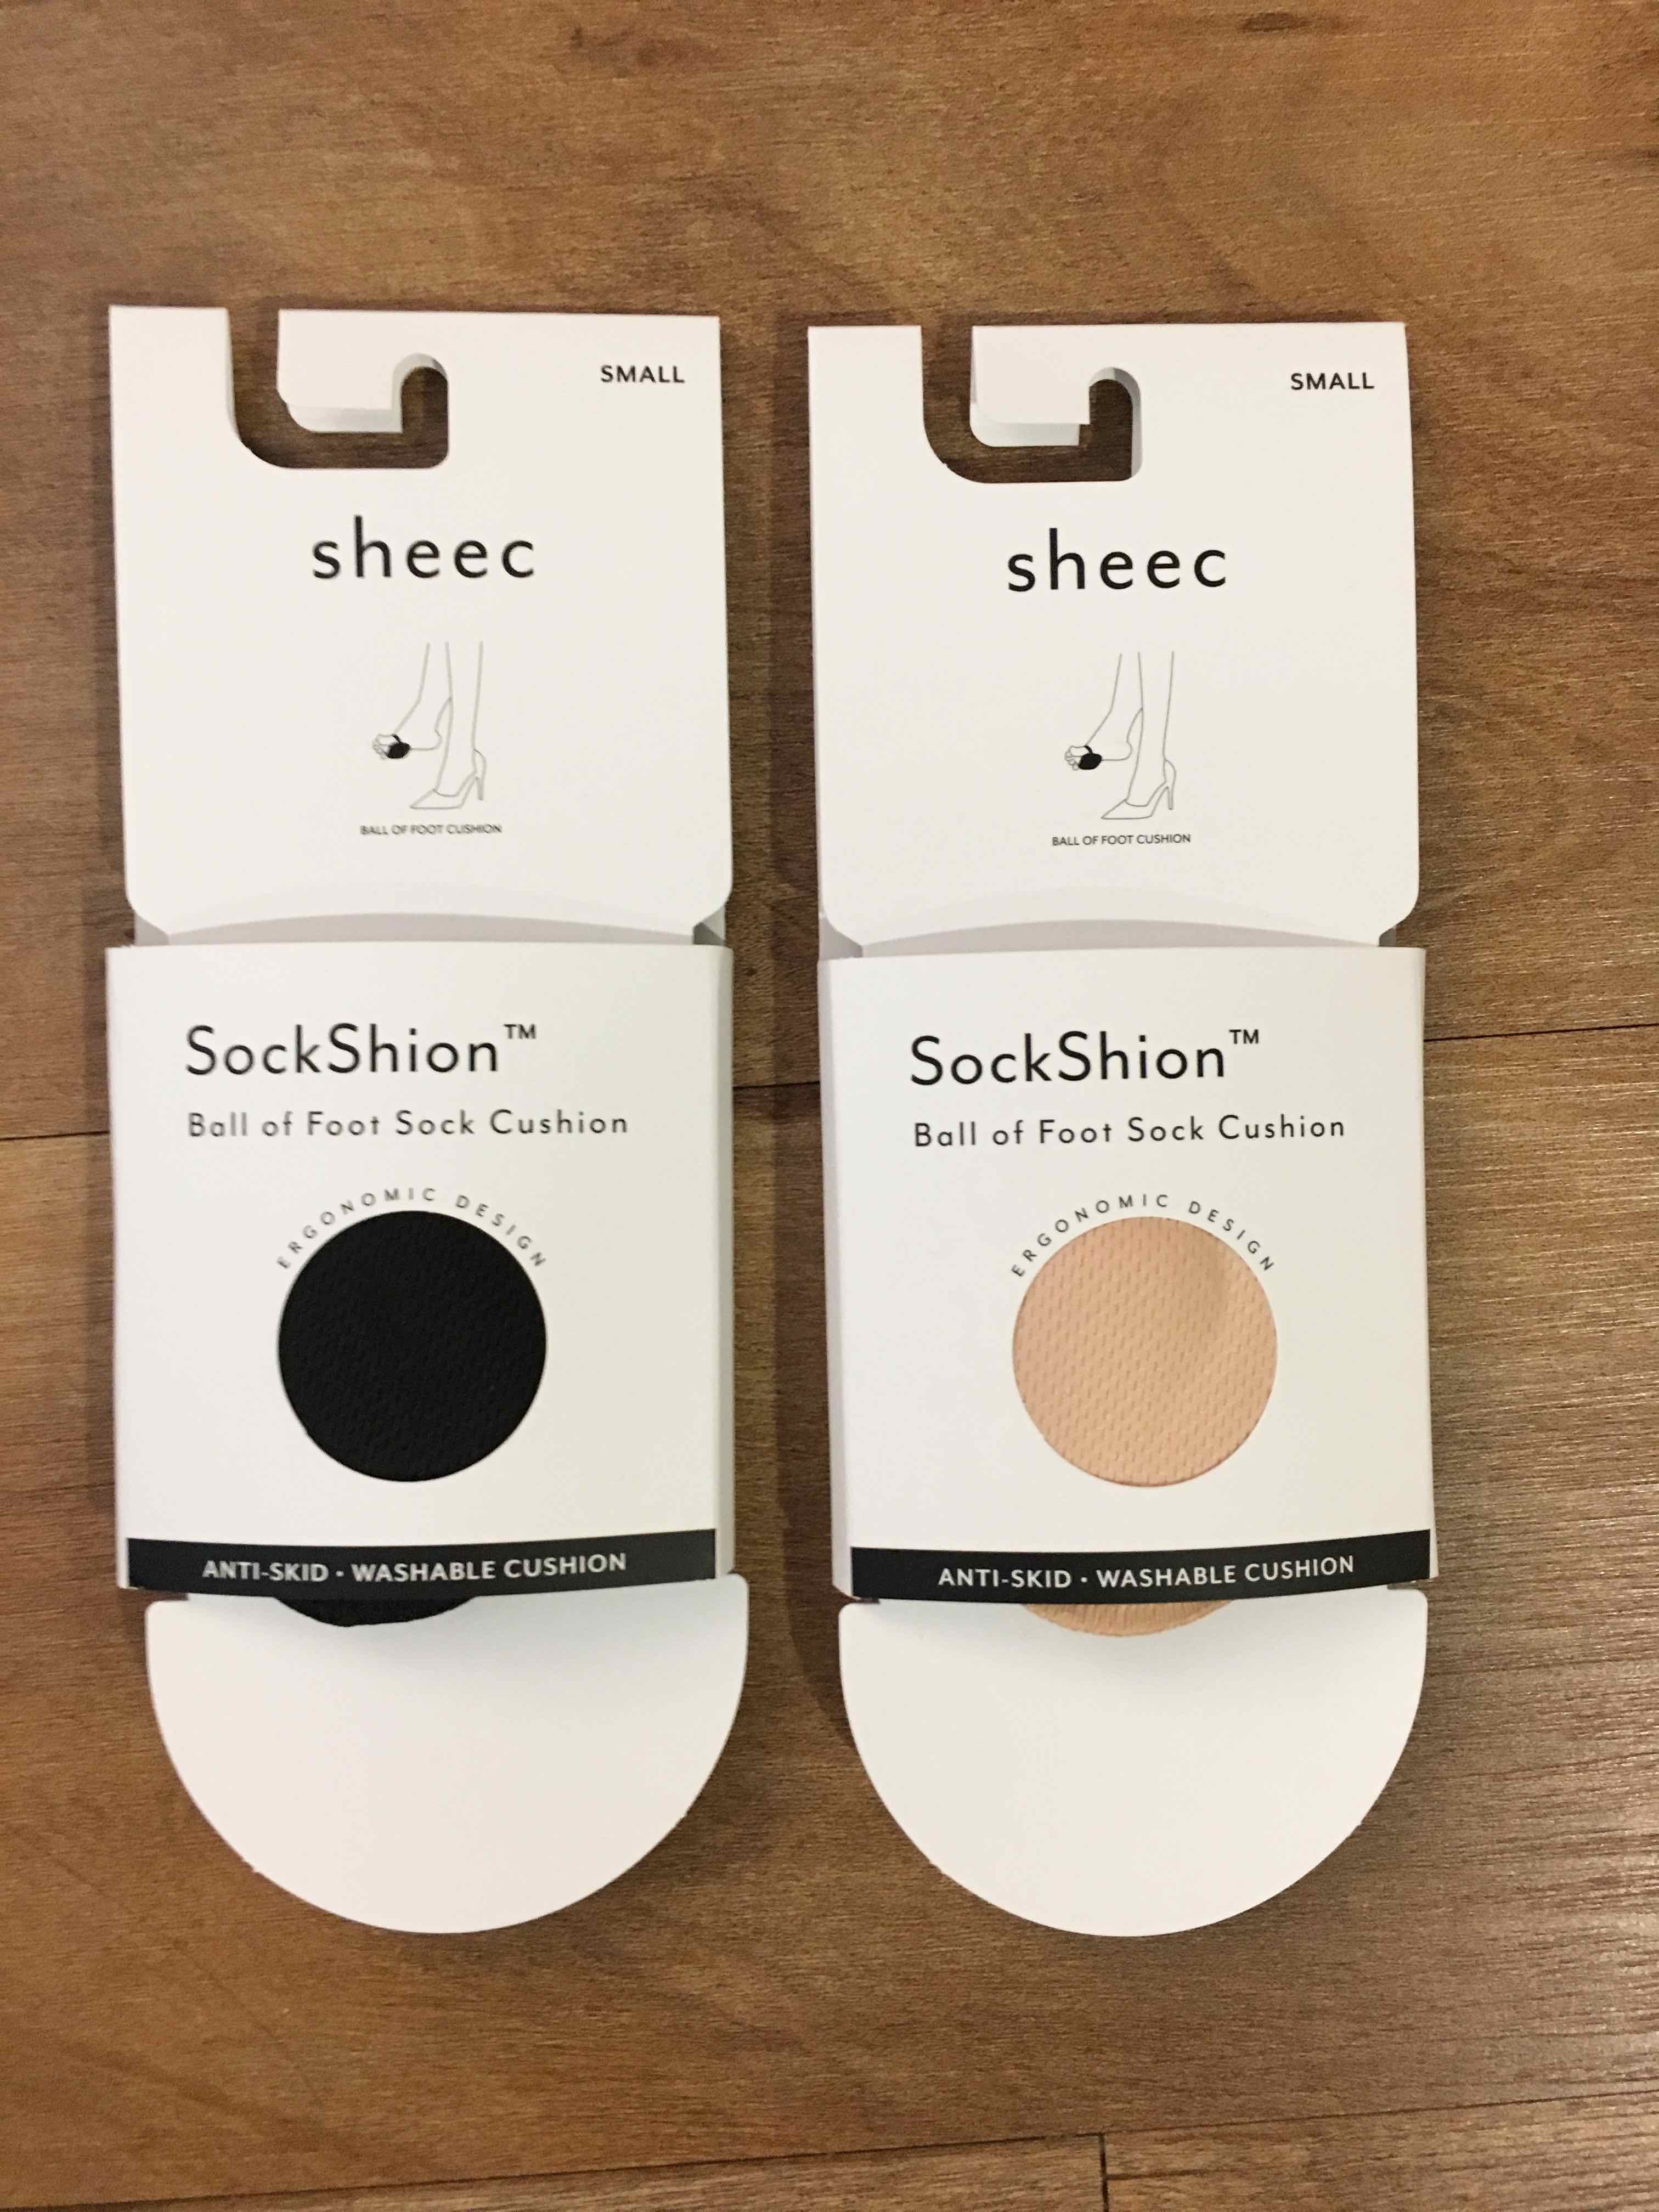 Best no show sock for women by Sheec Socks and Sheec SockShion cushion for ballet flats and perfect for Tieks by Gavrieli ballet flats review for wearing ballet flats all day long